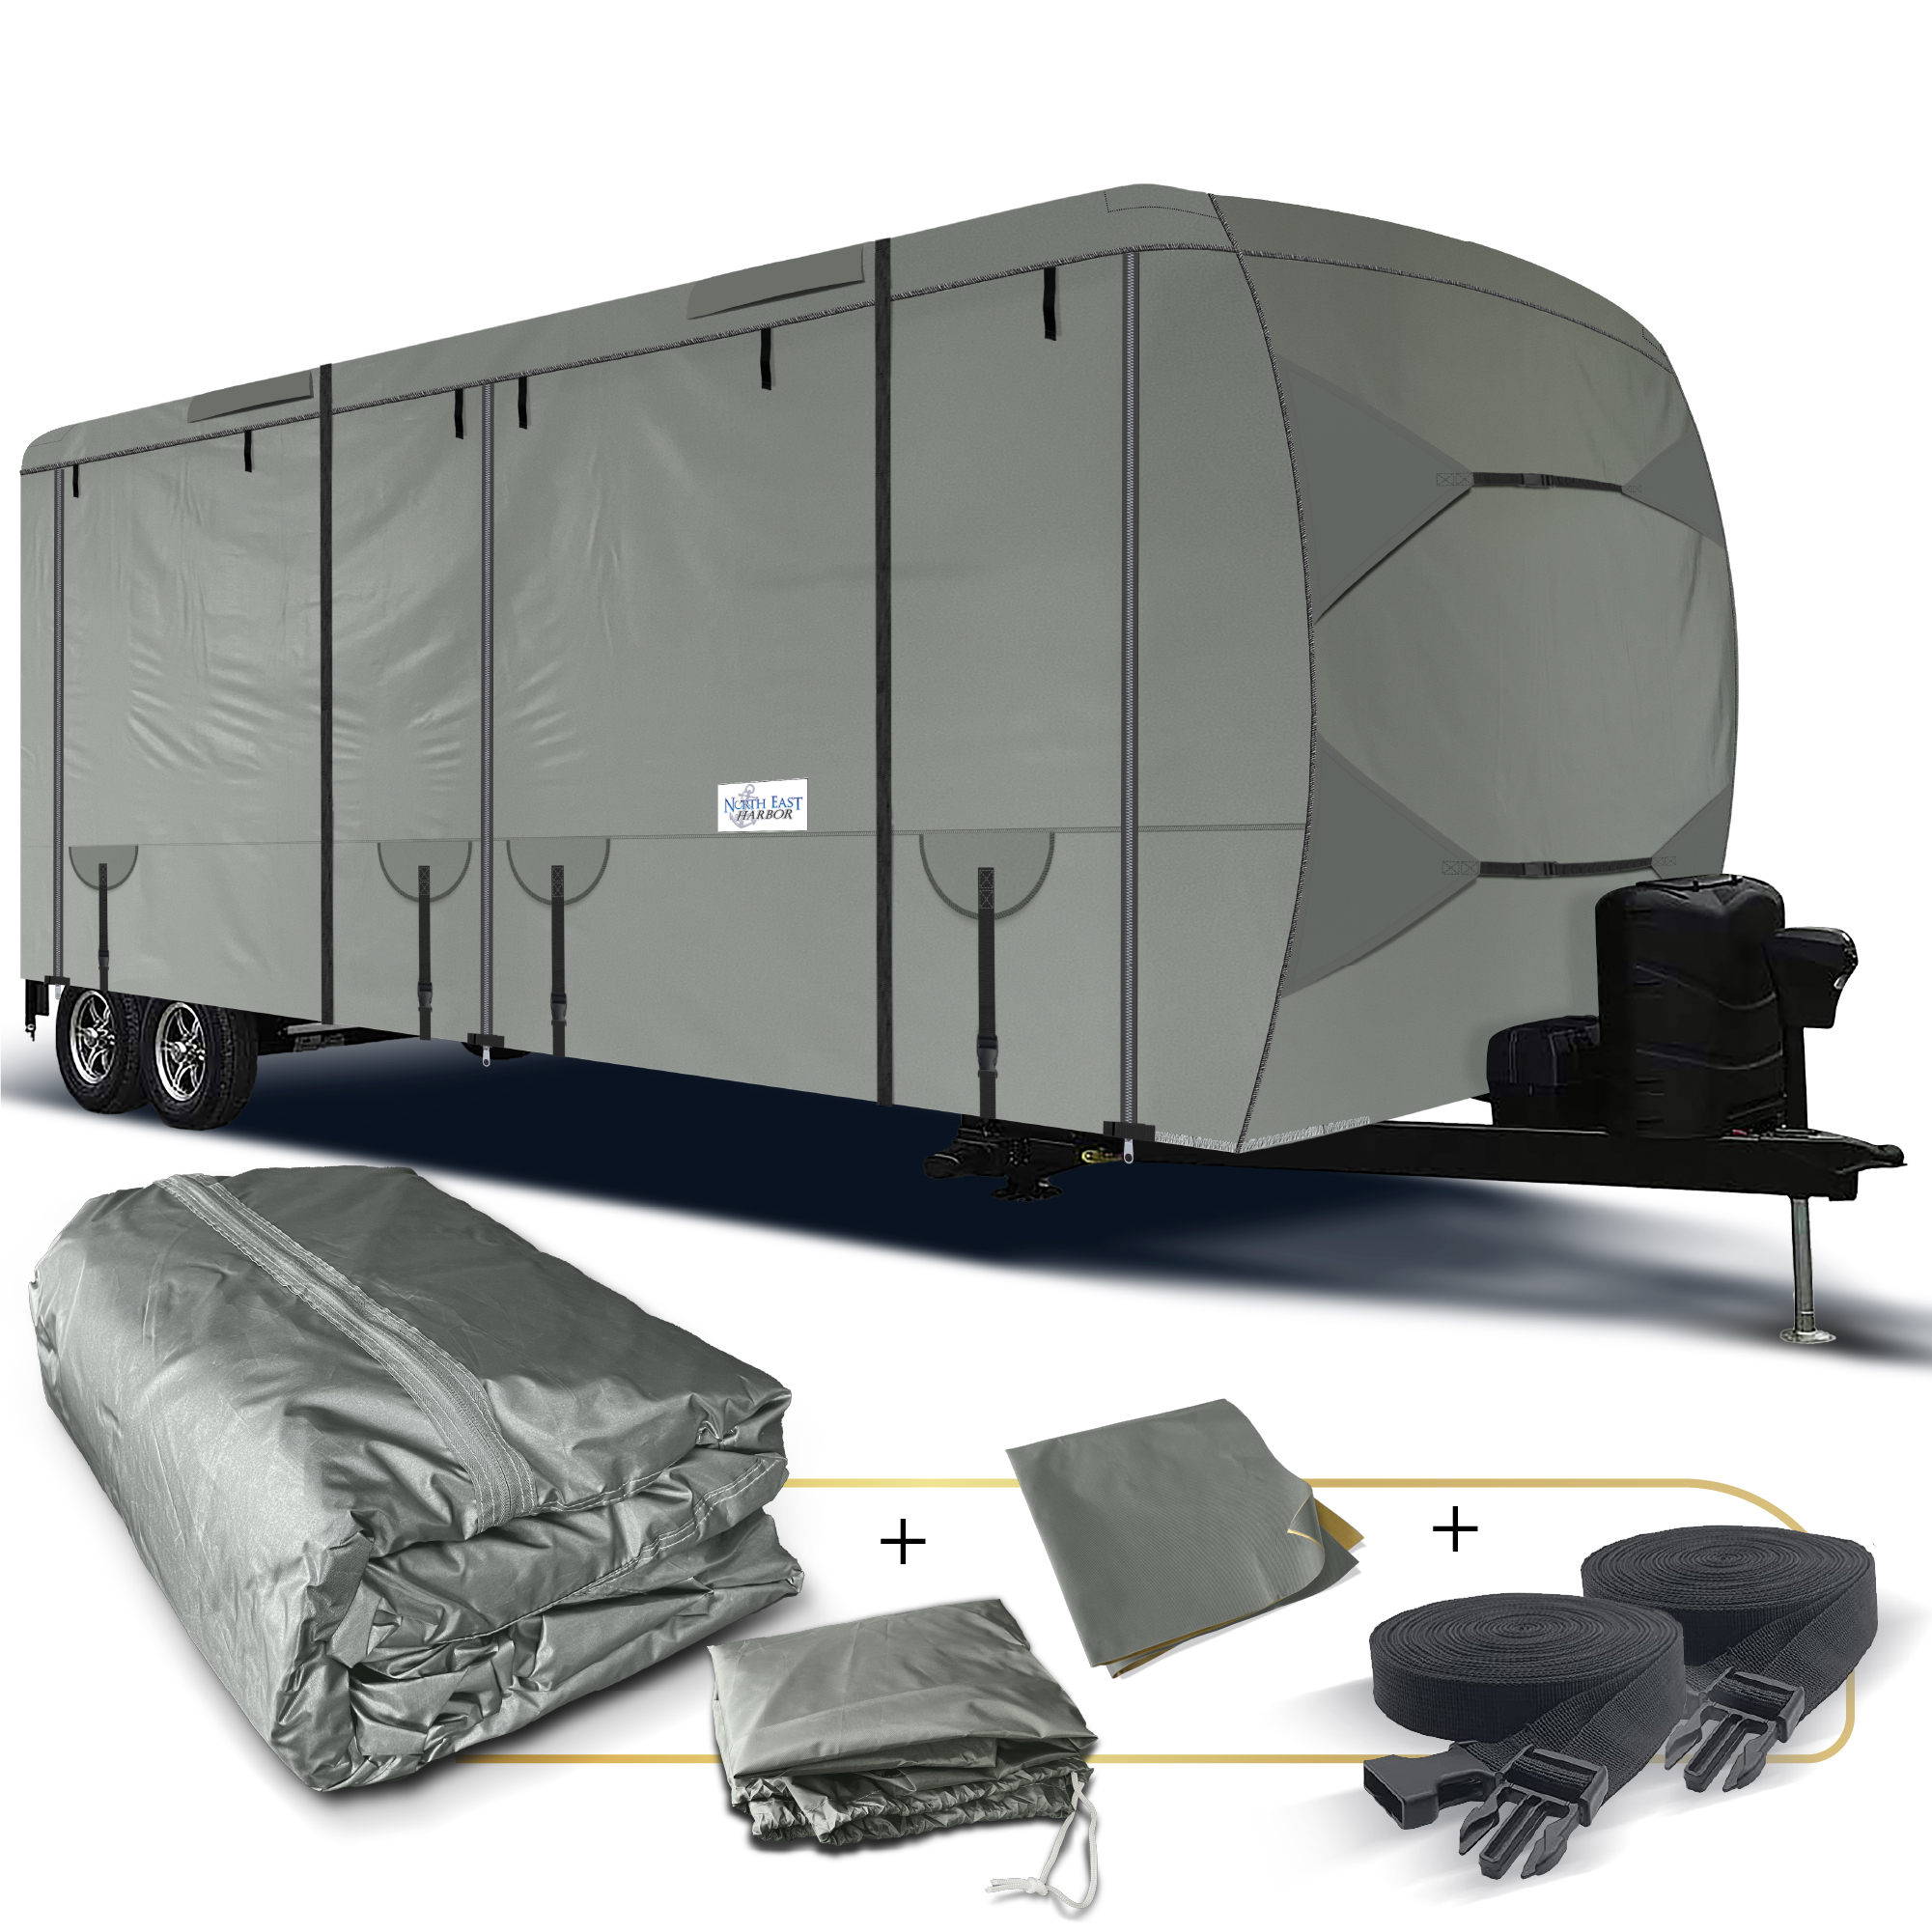 North East Harbor Travel Trailer Cover 27 ft to 30 ft Waterproof Ripstop Cover 600D Heavy Duty RV Storage Cover Camper Cover RV Accessories for